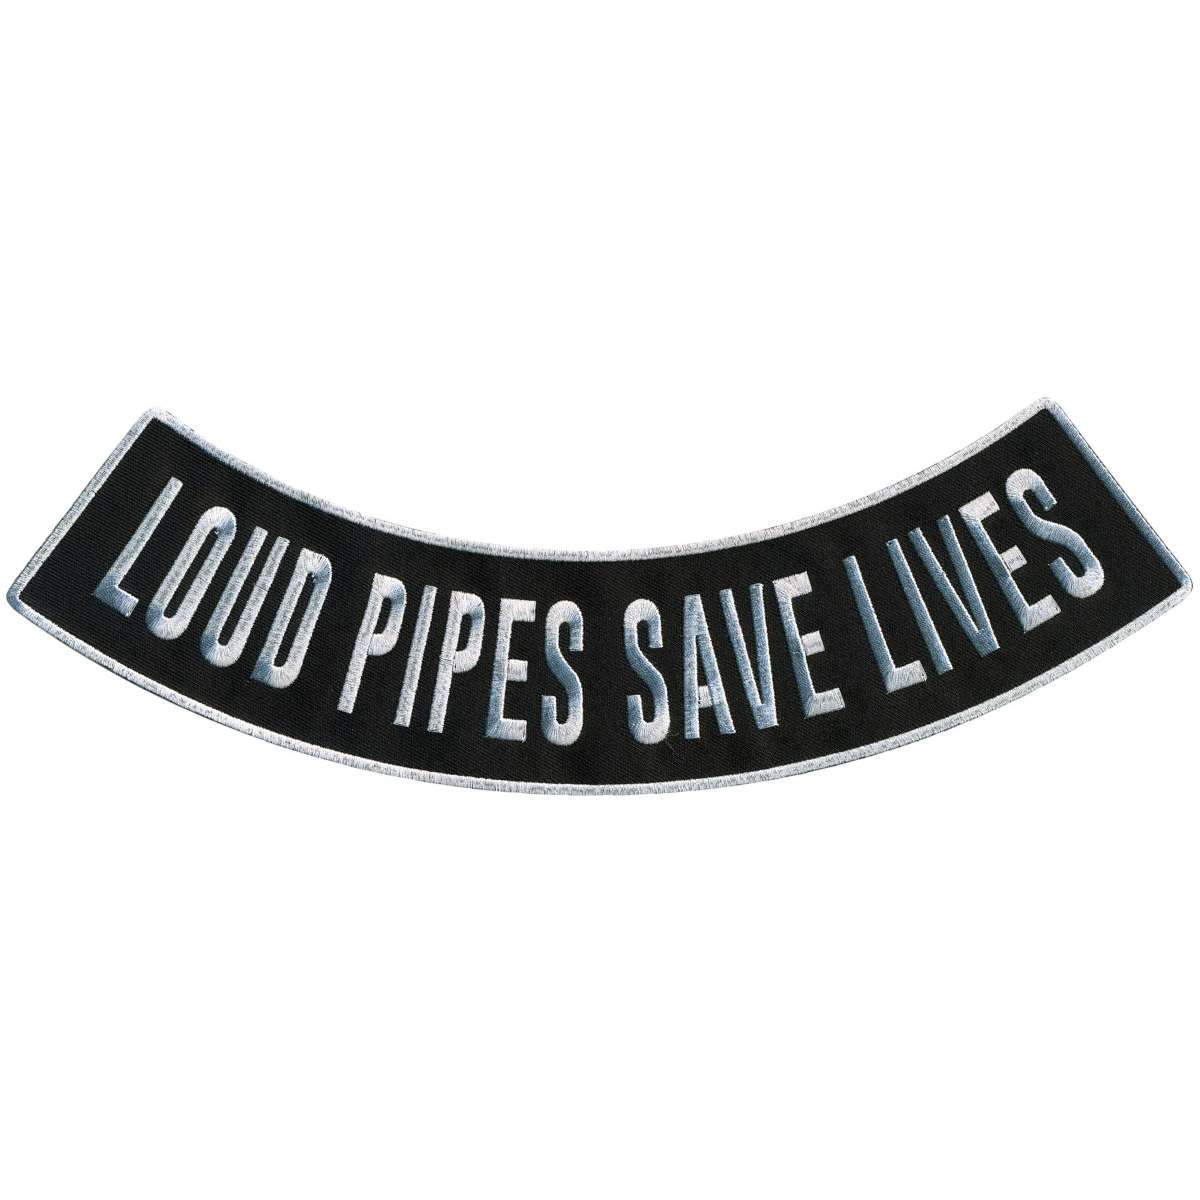 Hot Leathers Loud Pipes 12” X 3” Bottom Rocker Patch PPM5199